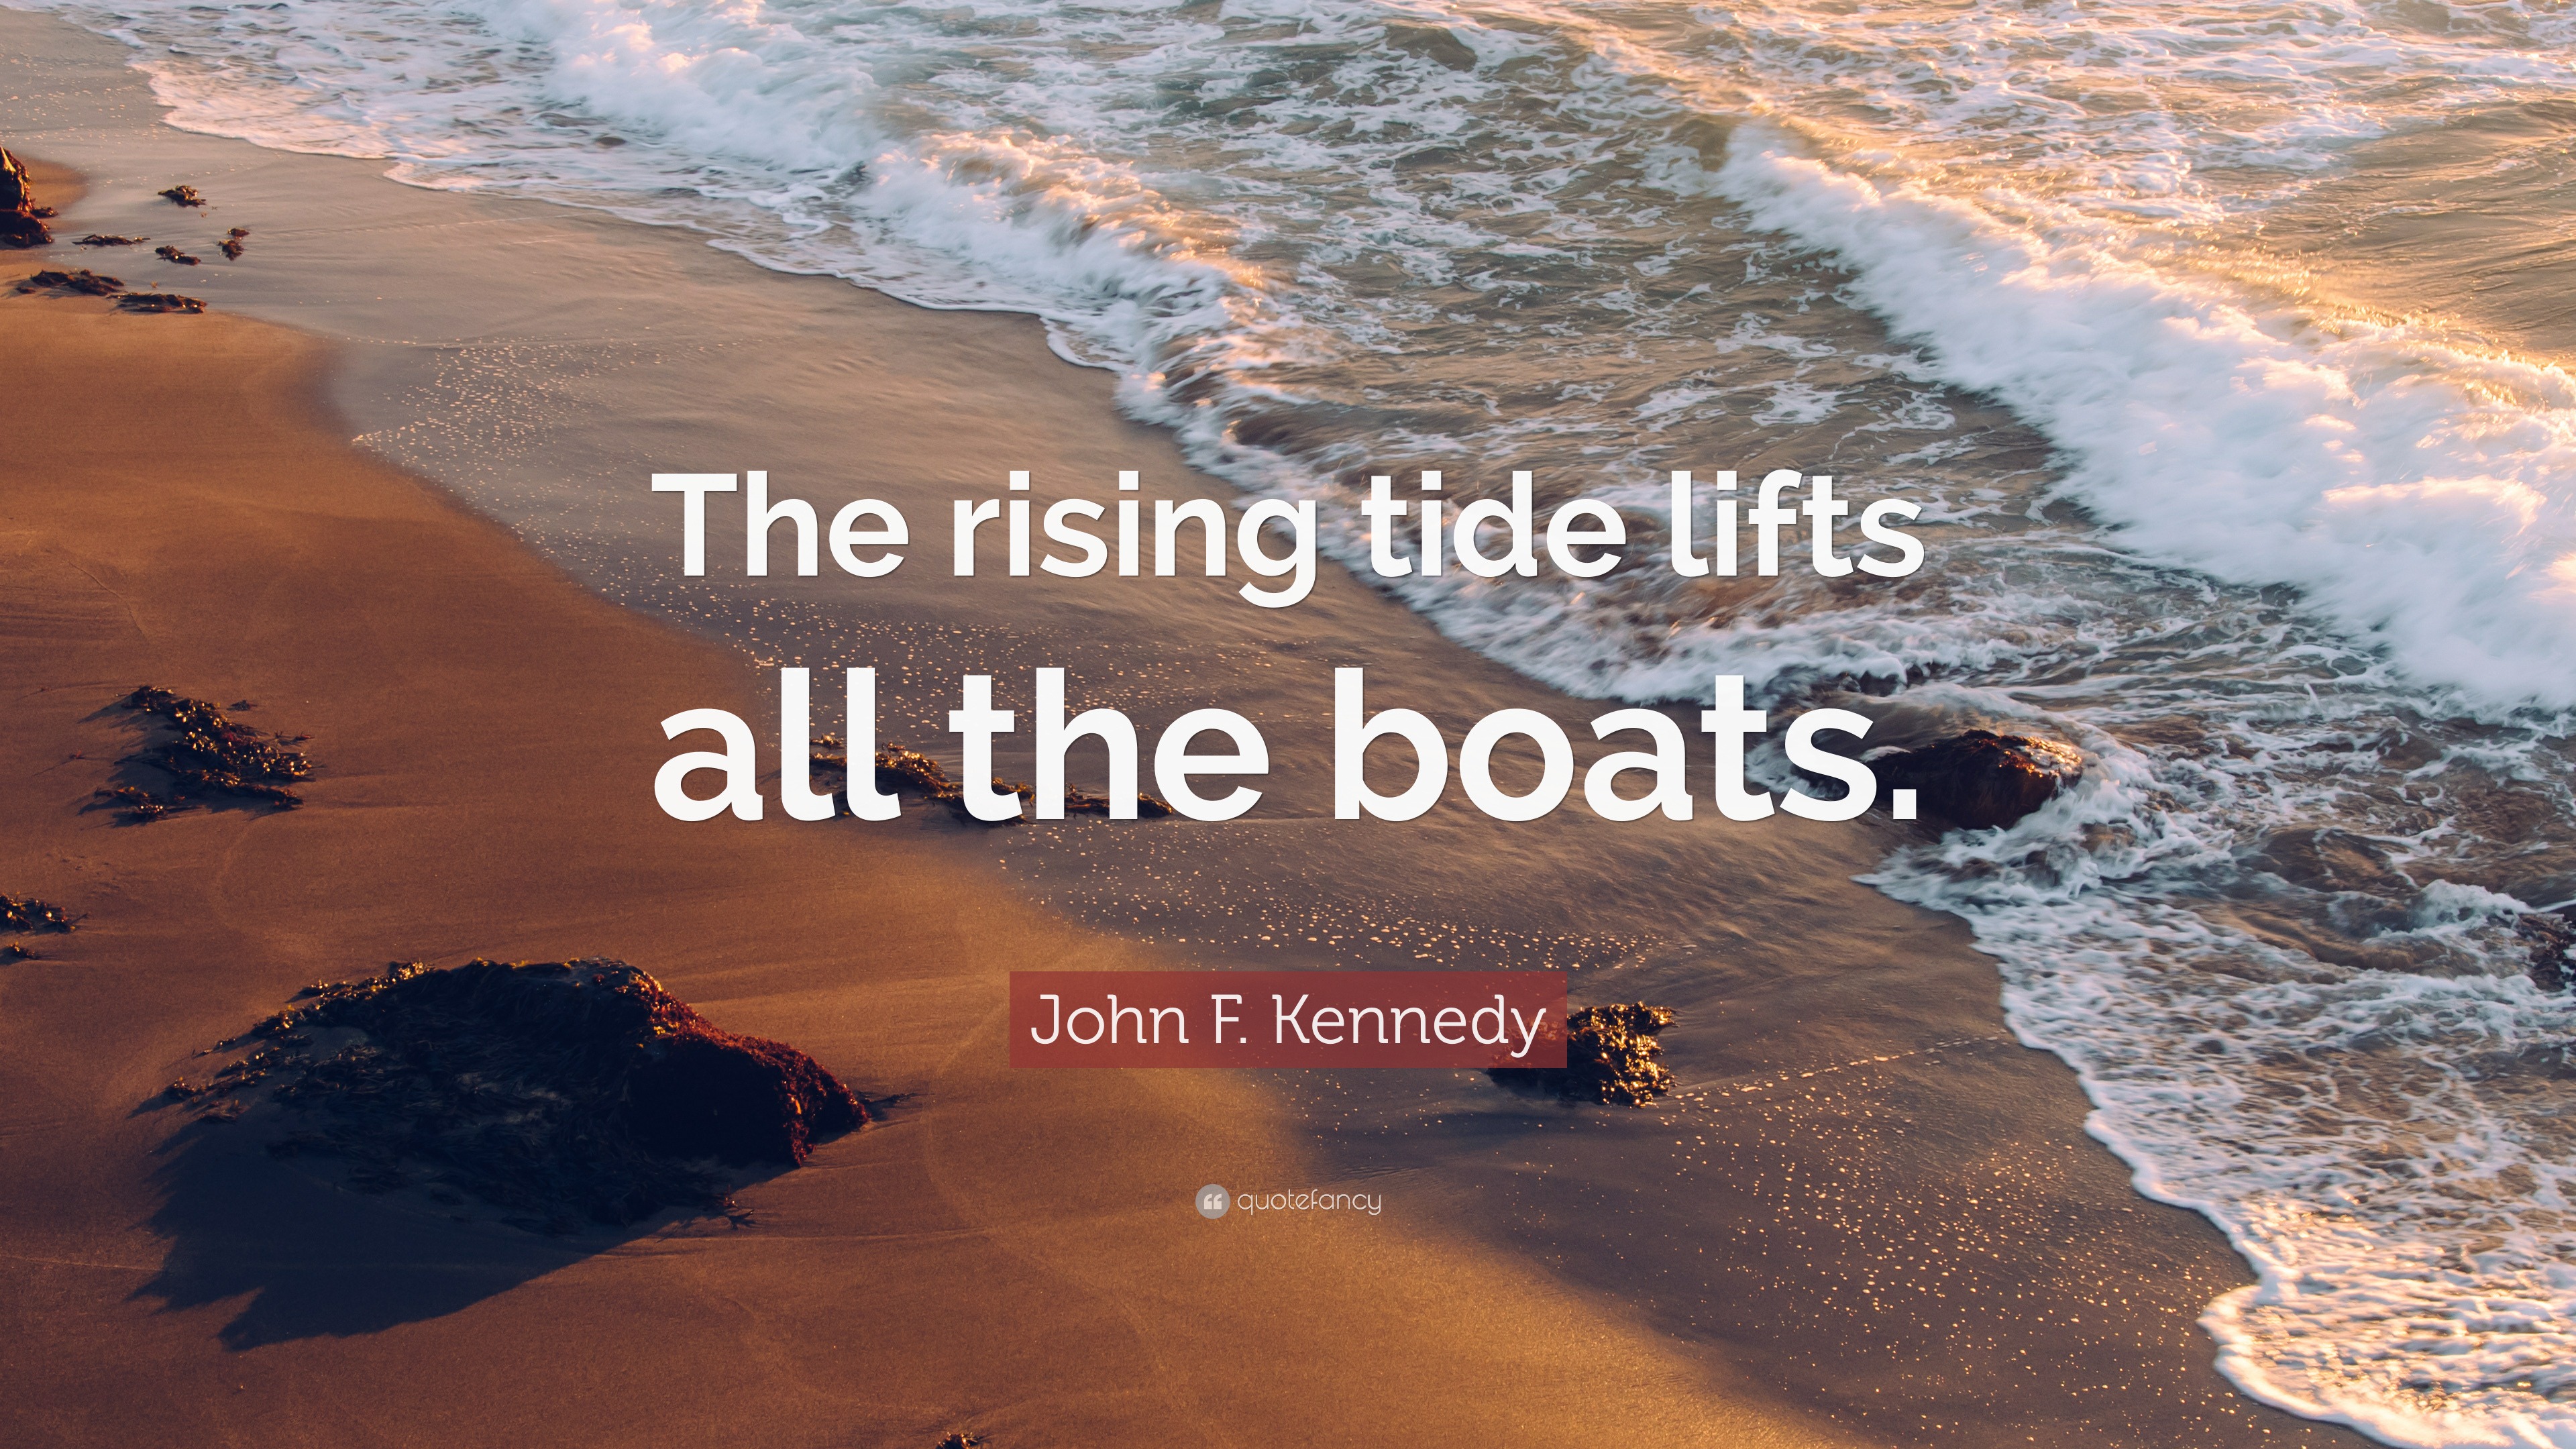 The Rising Tide for Good